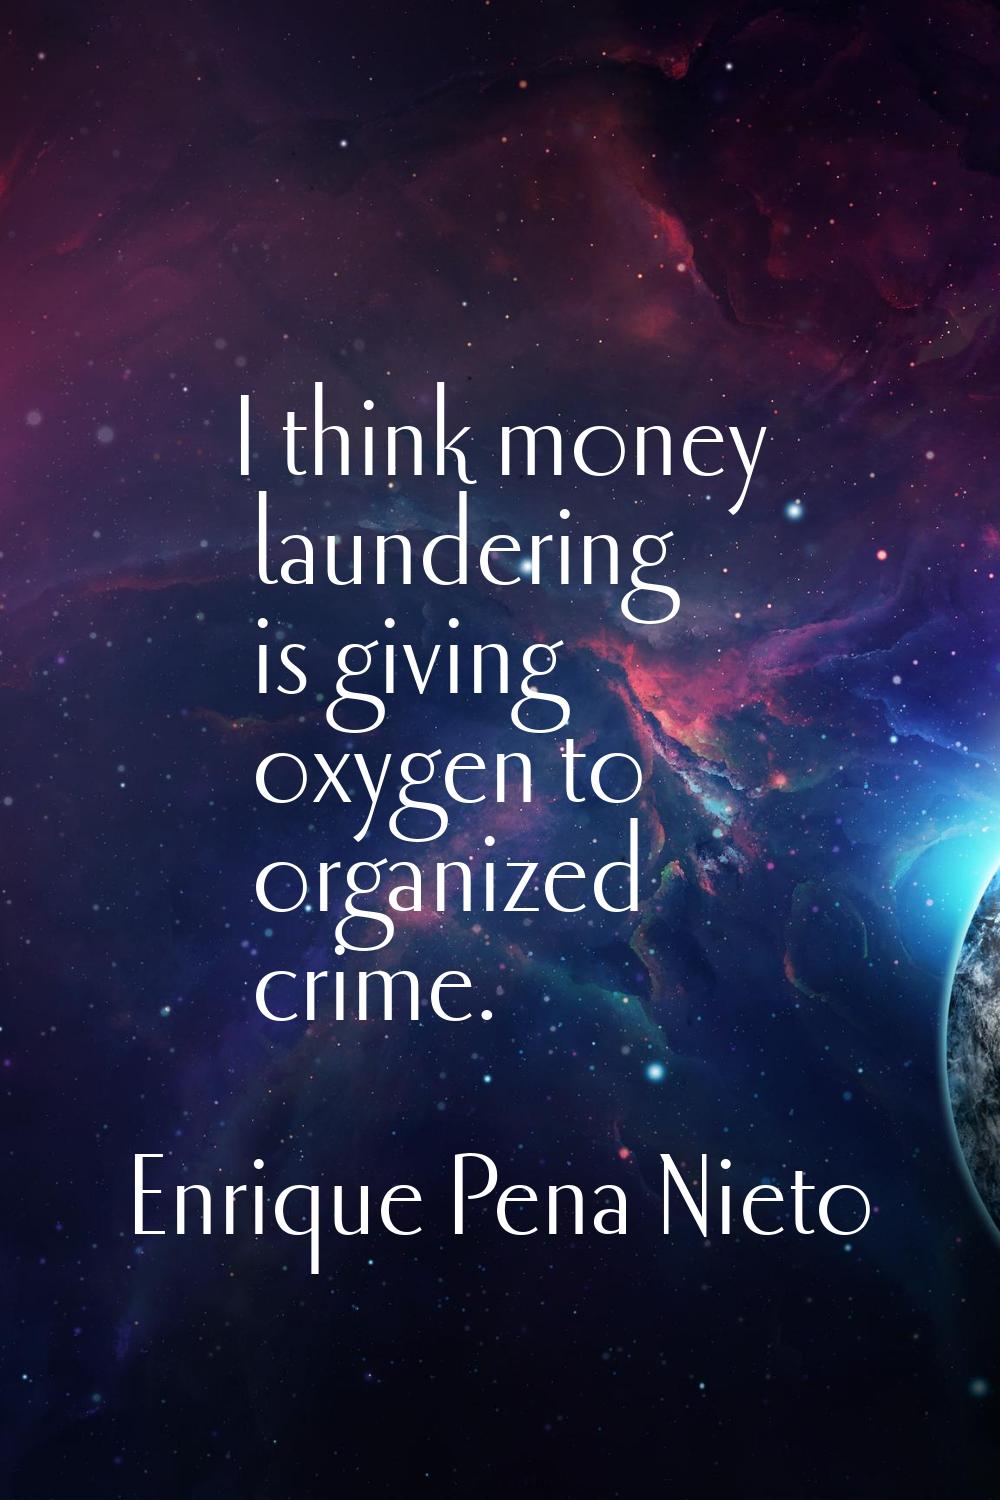 I think money laundering is giving oxygen to organized crime.